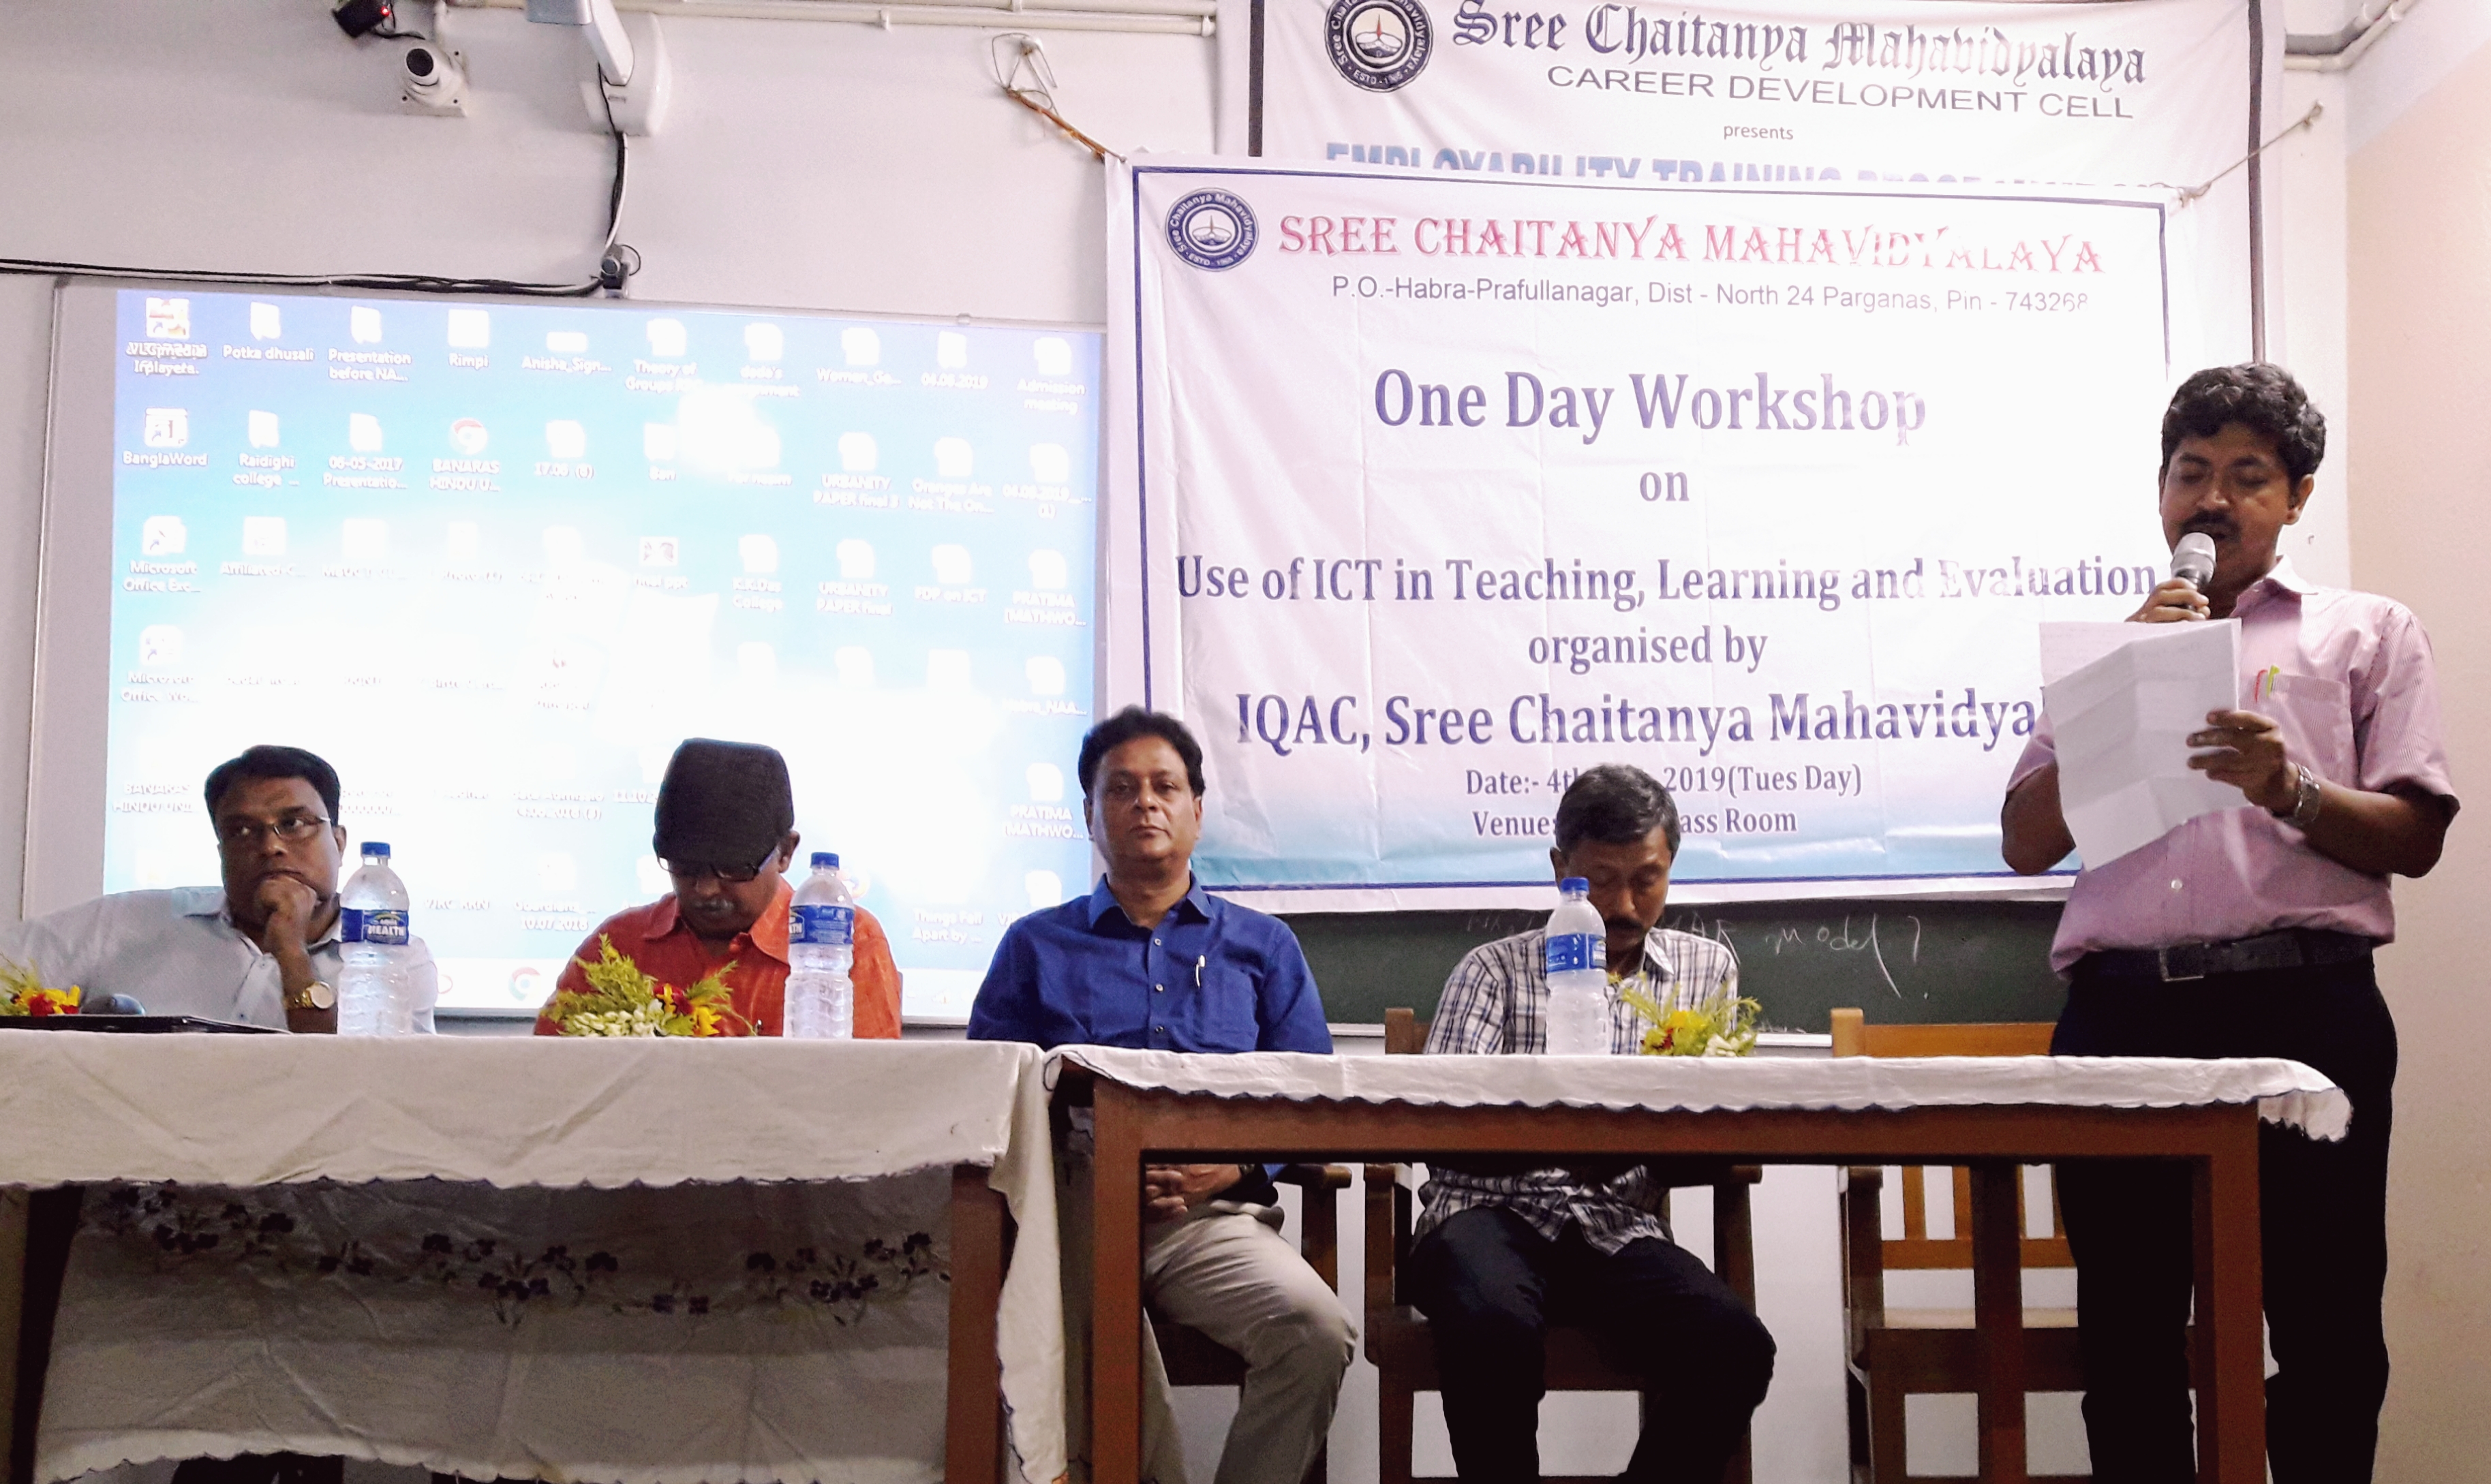 One Day Workshop on ICT Based Teaching, Learning and Evalution Organized By IQAC, SCM, 04-06-2019